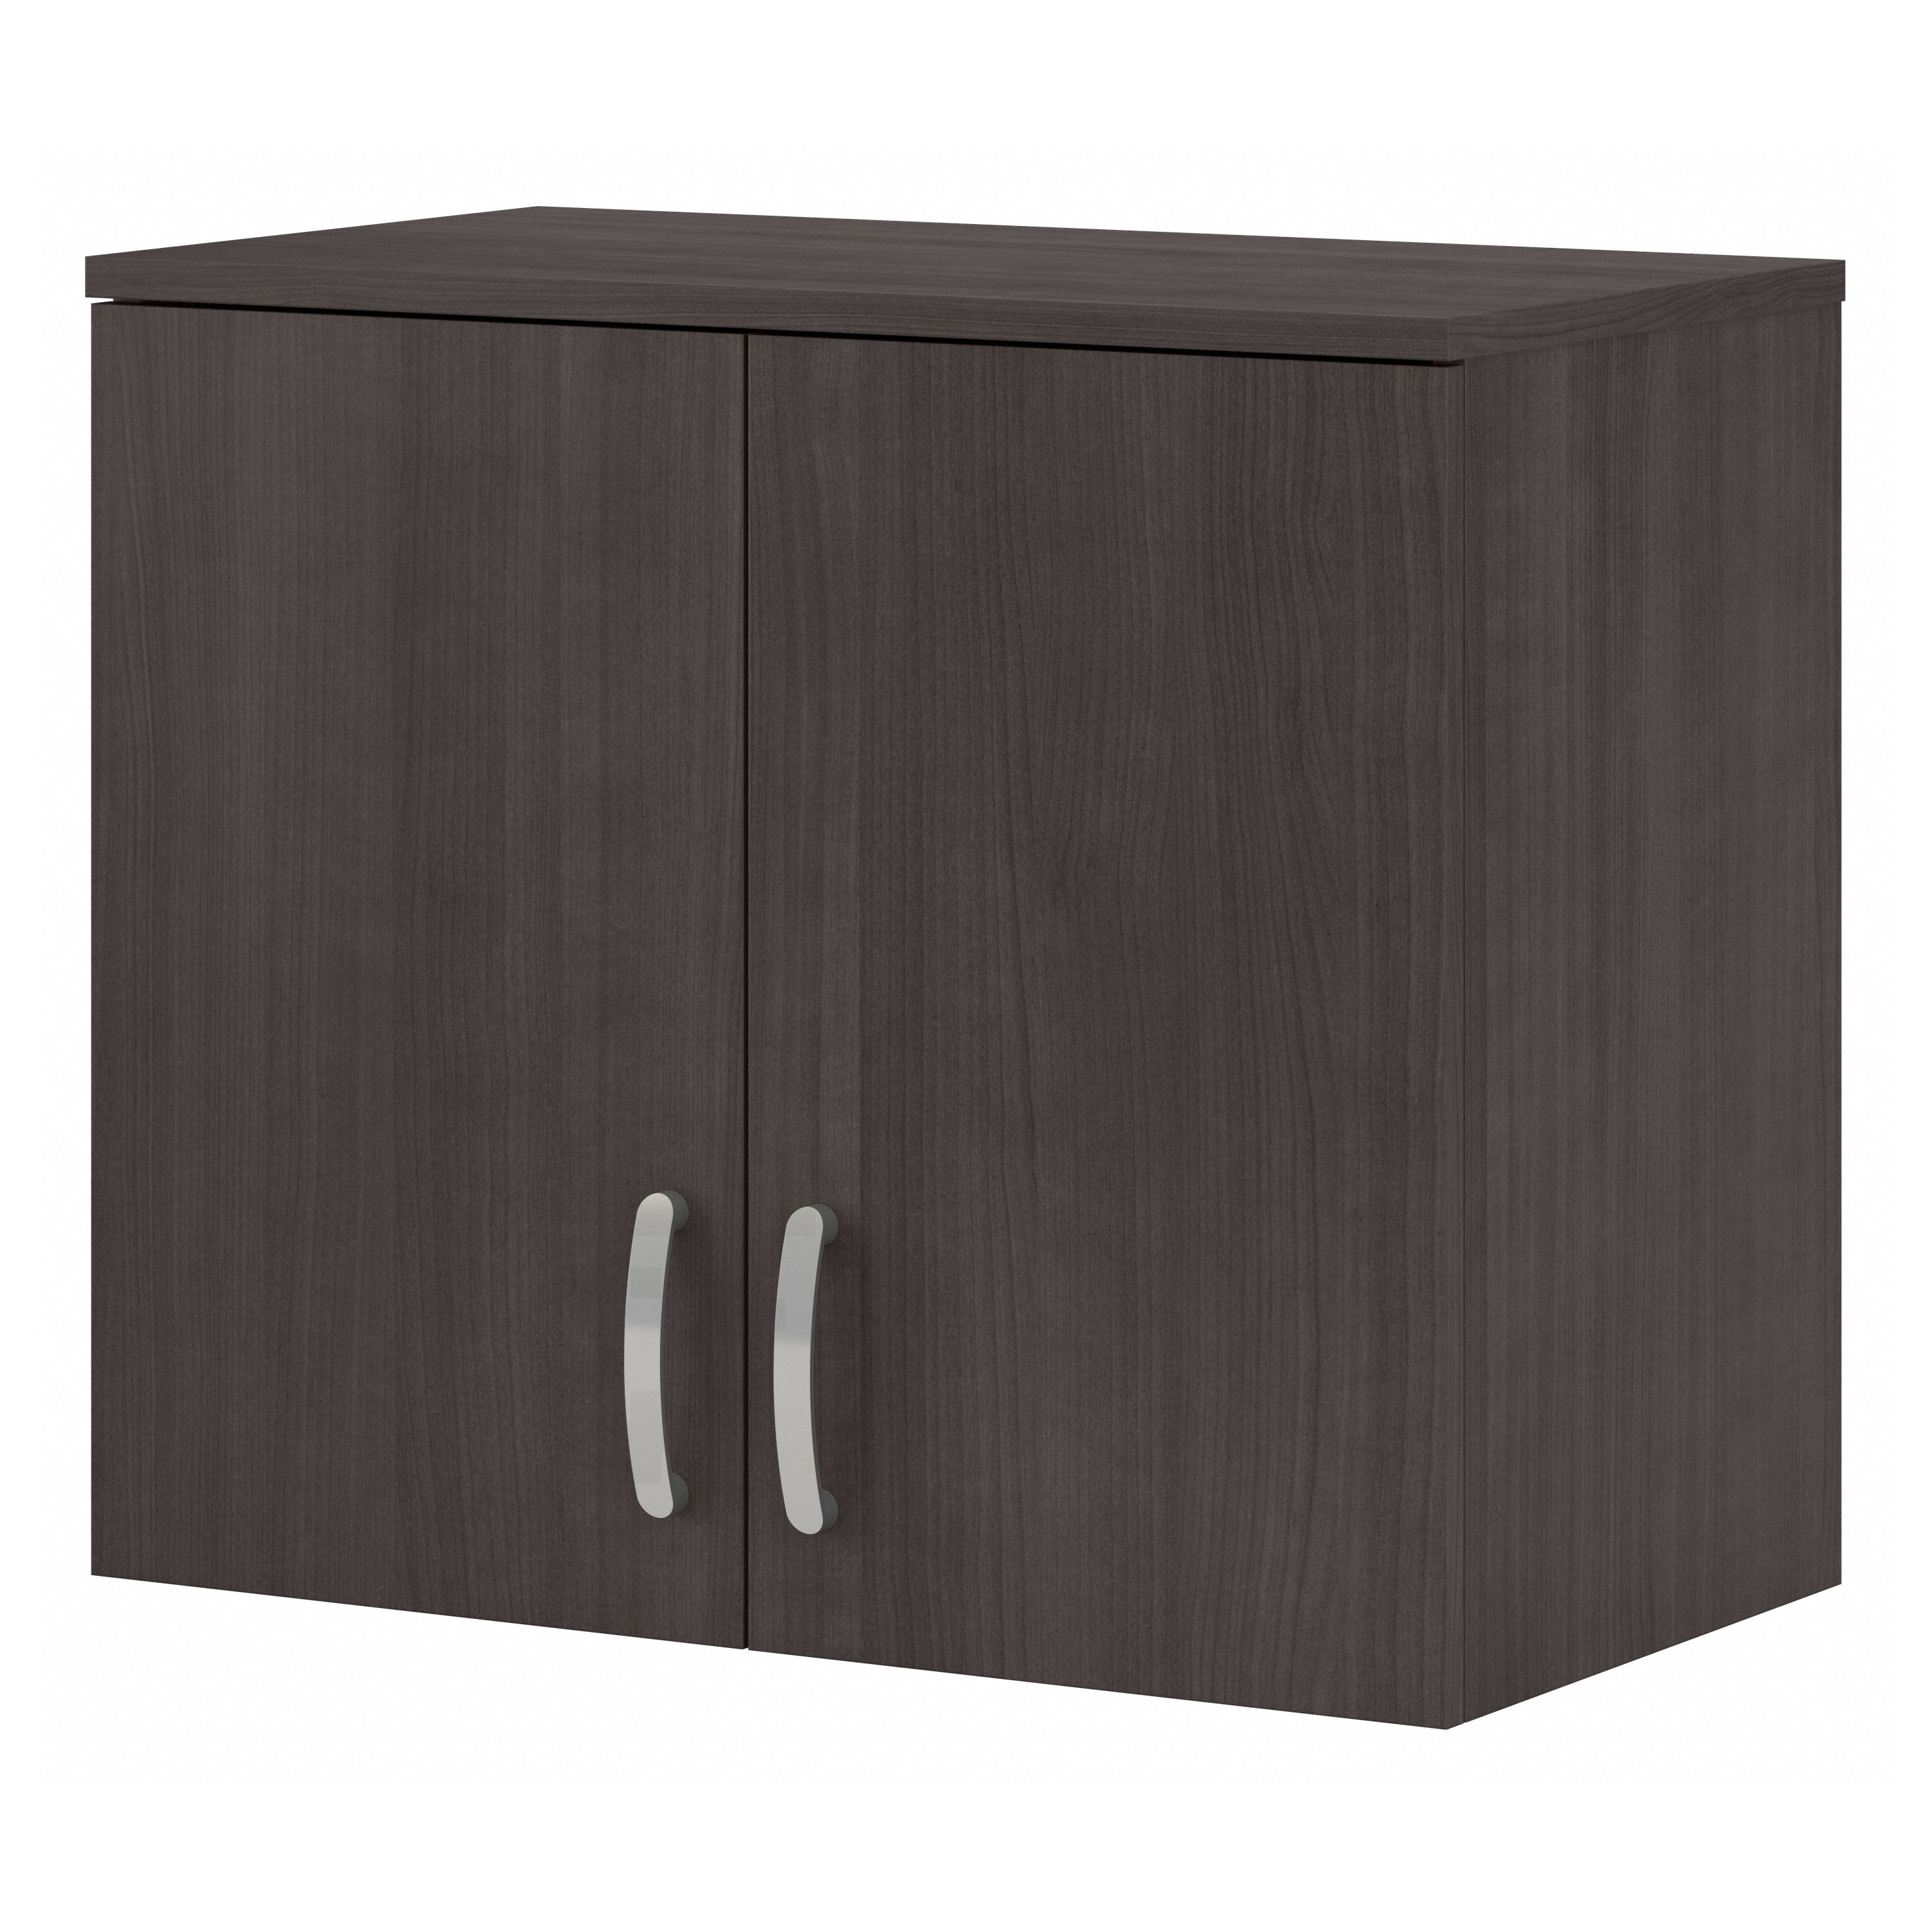 Shop Bush Business Furniture Universal Garage Wall Cabinet with Doors and Shelves 02 GAS428SG-Z #color_storm gray